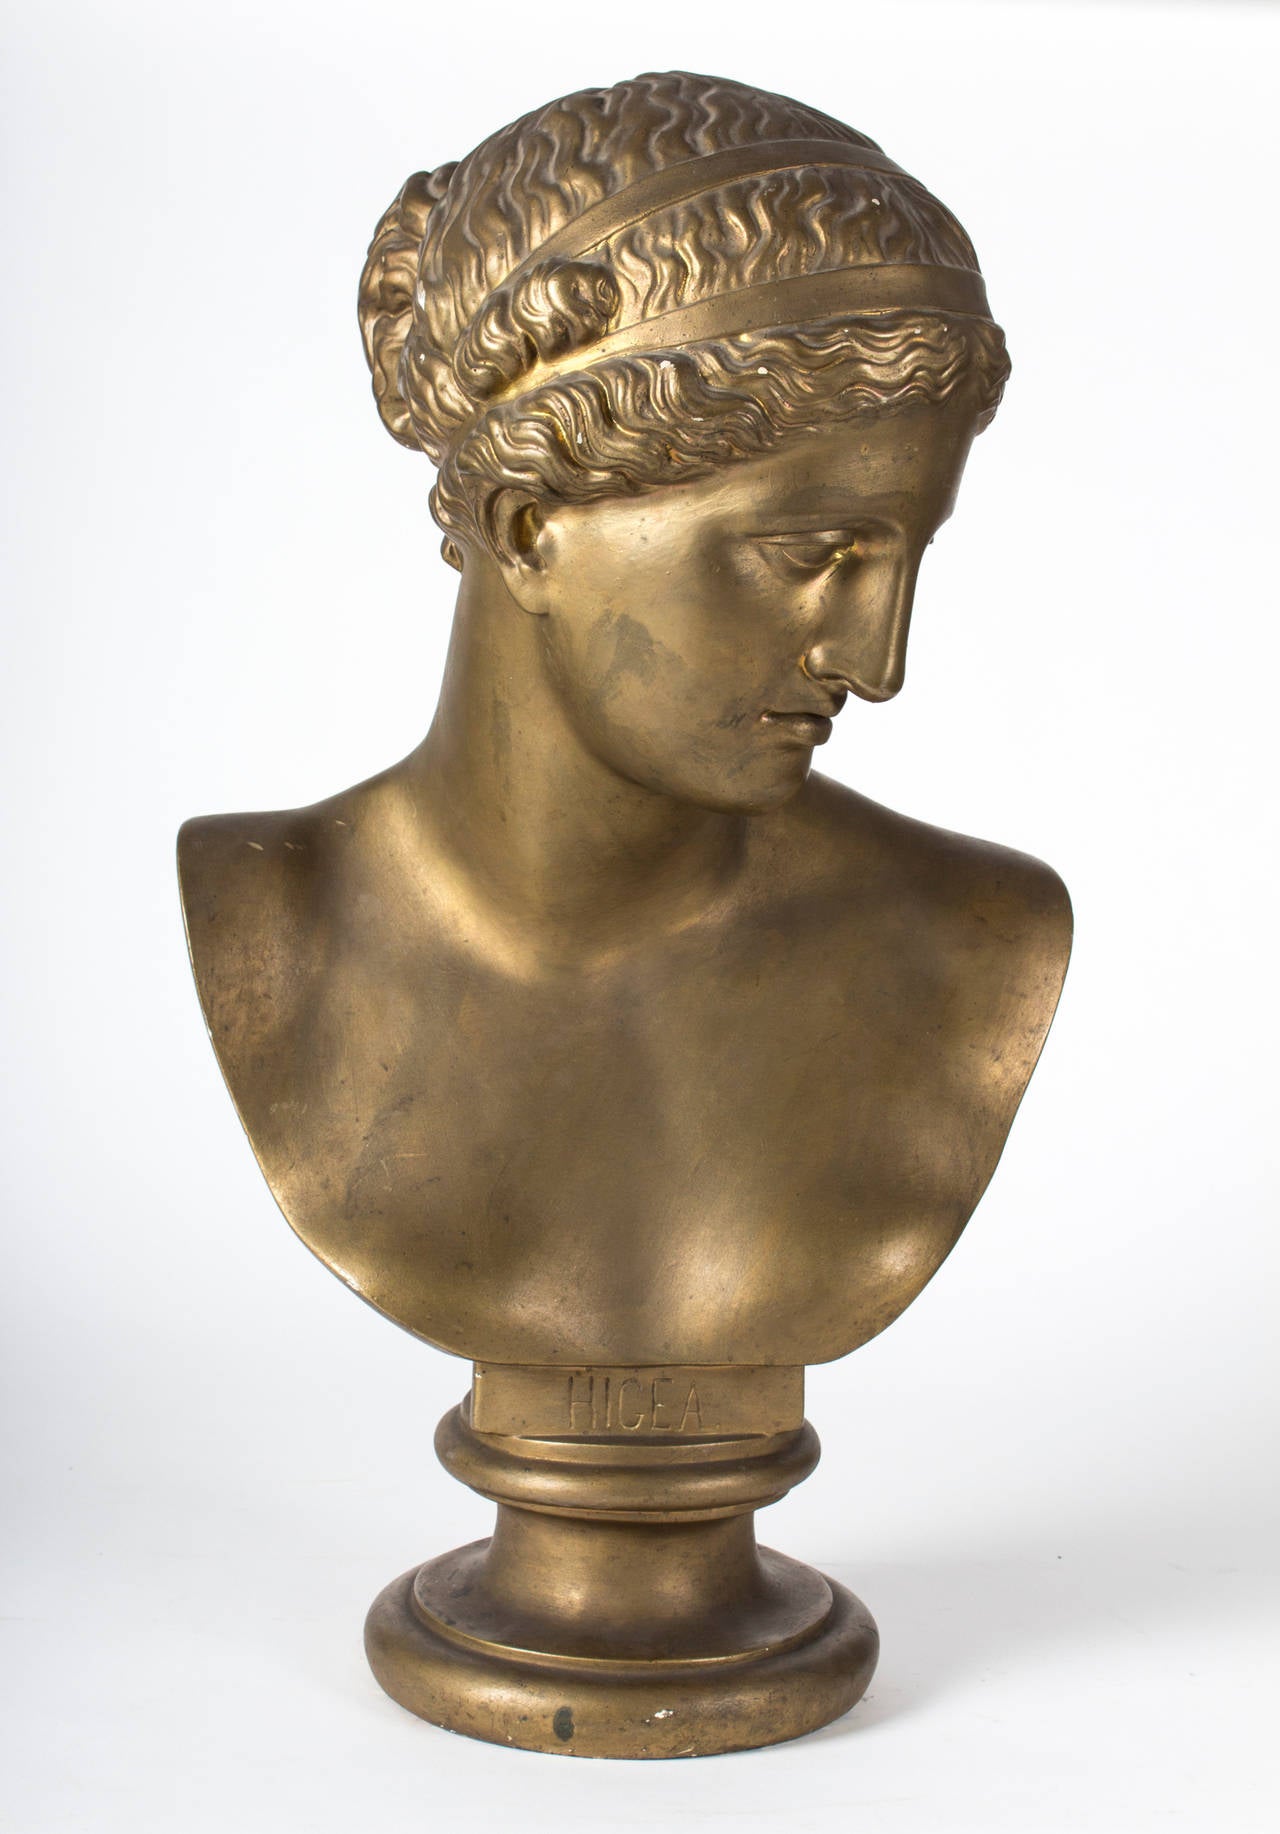 HYGIEIA was the daughter of Asklepios, goddess of health and patron saint of
pharmacists.

Gold painted plaster, inscribed on base „HIGEA“.